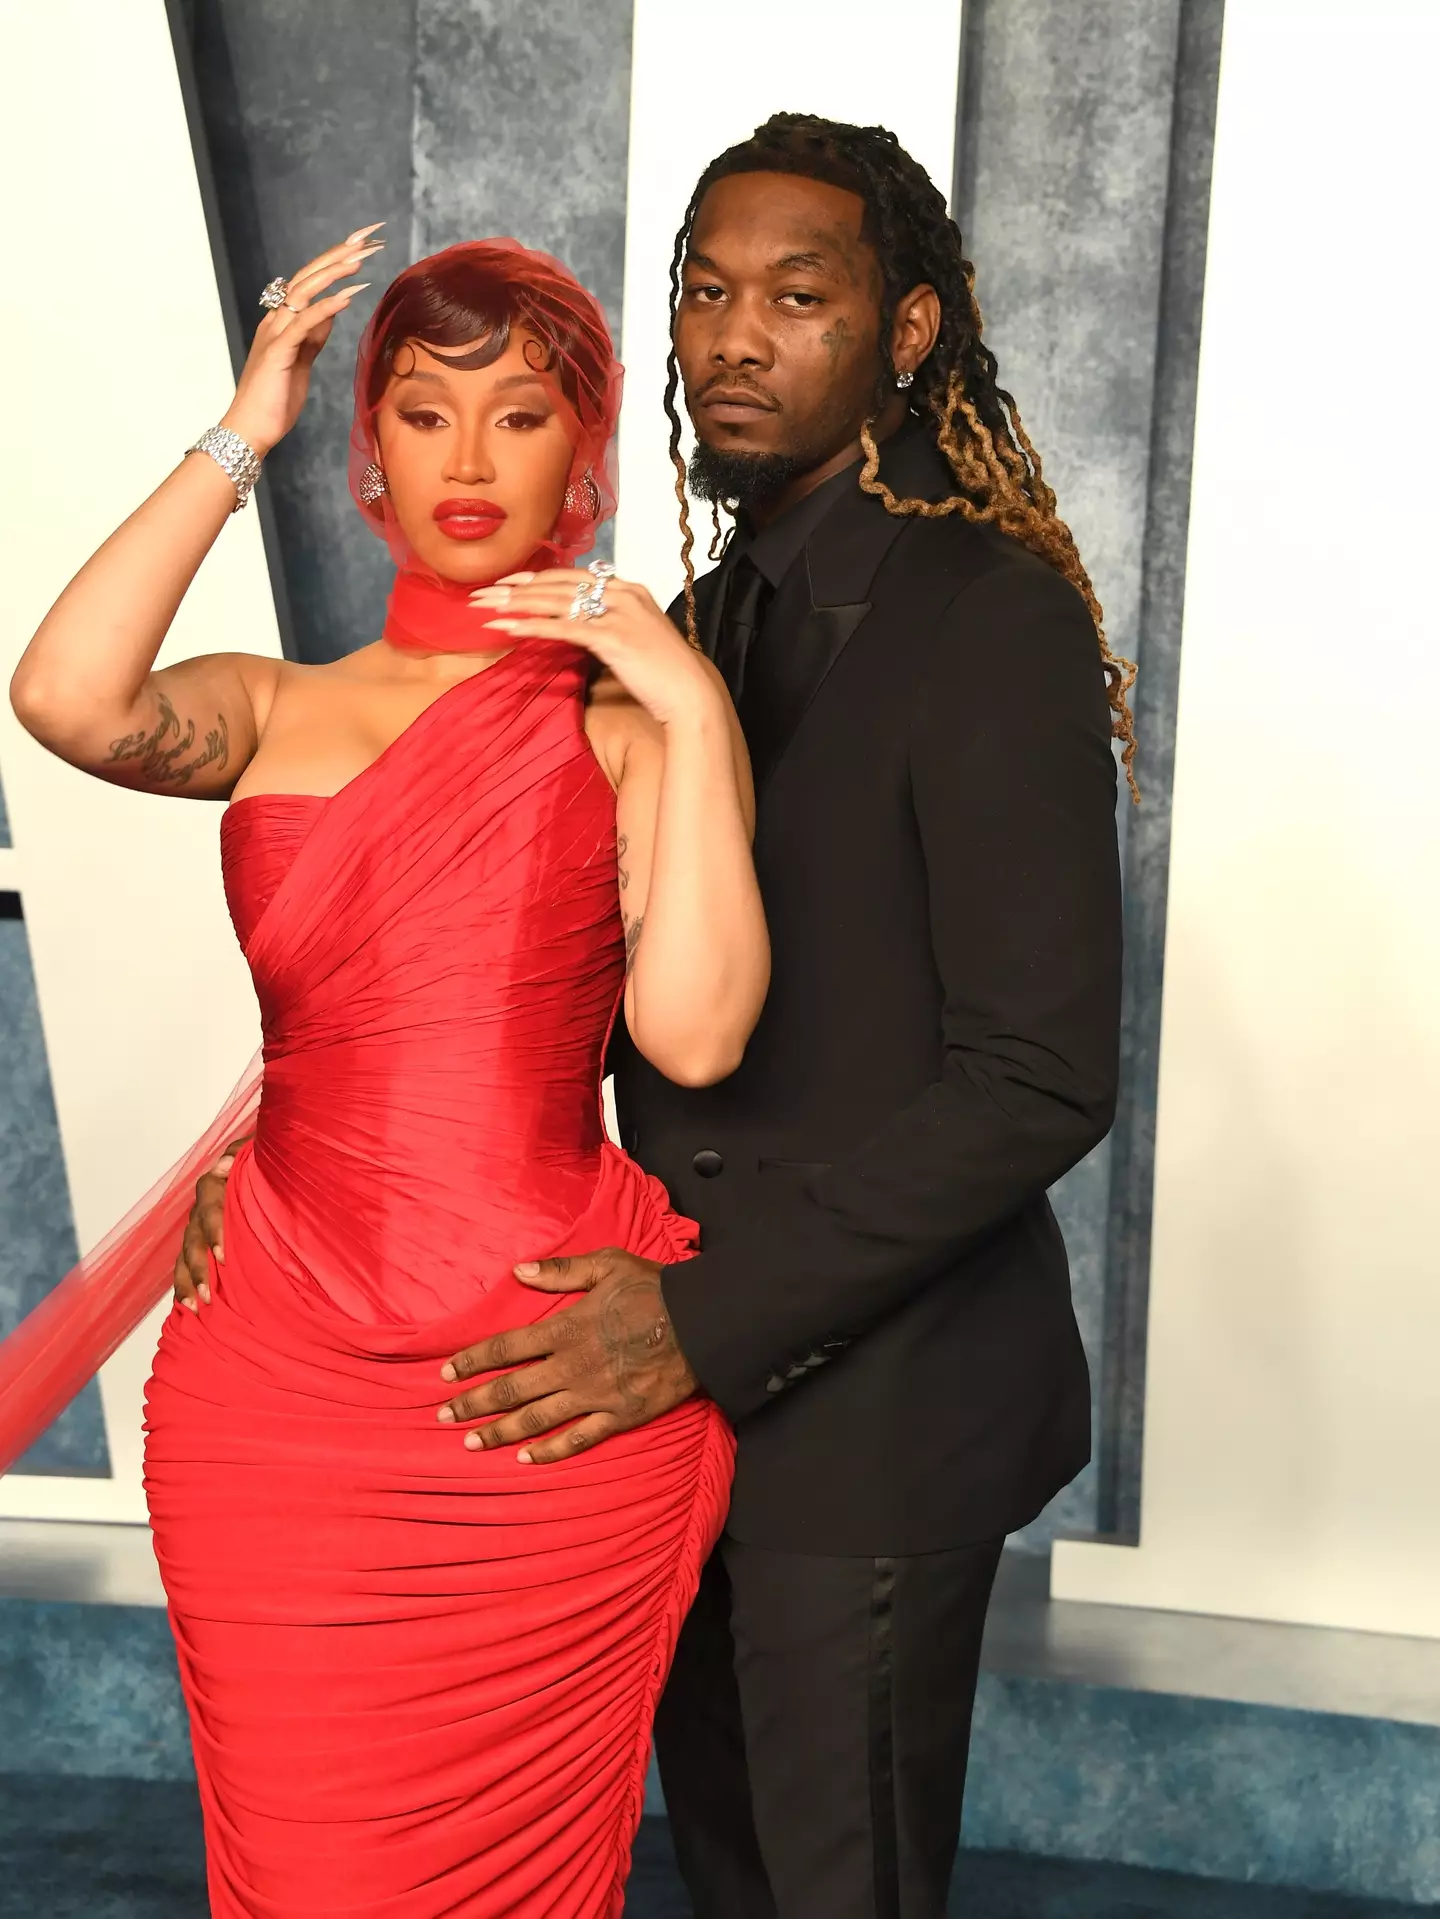 Cardi B and Offset have been married since 2017.